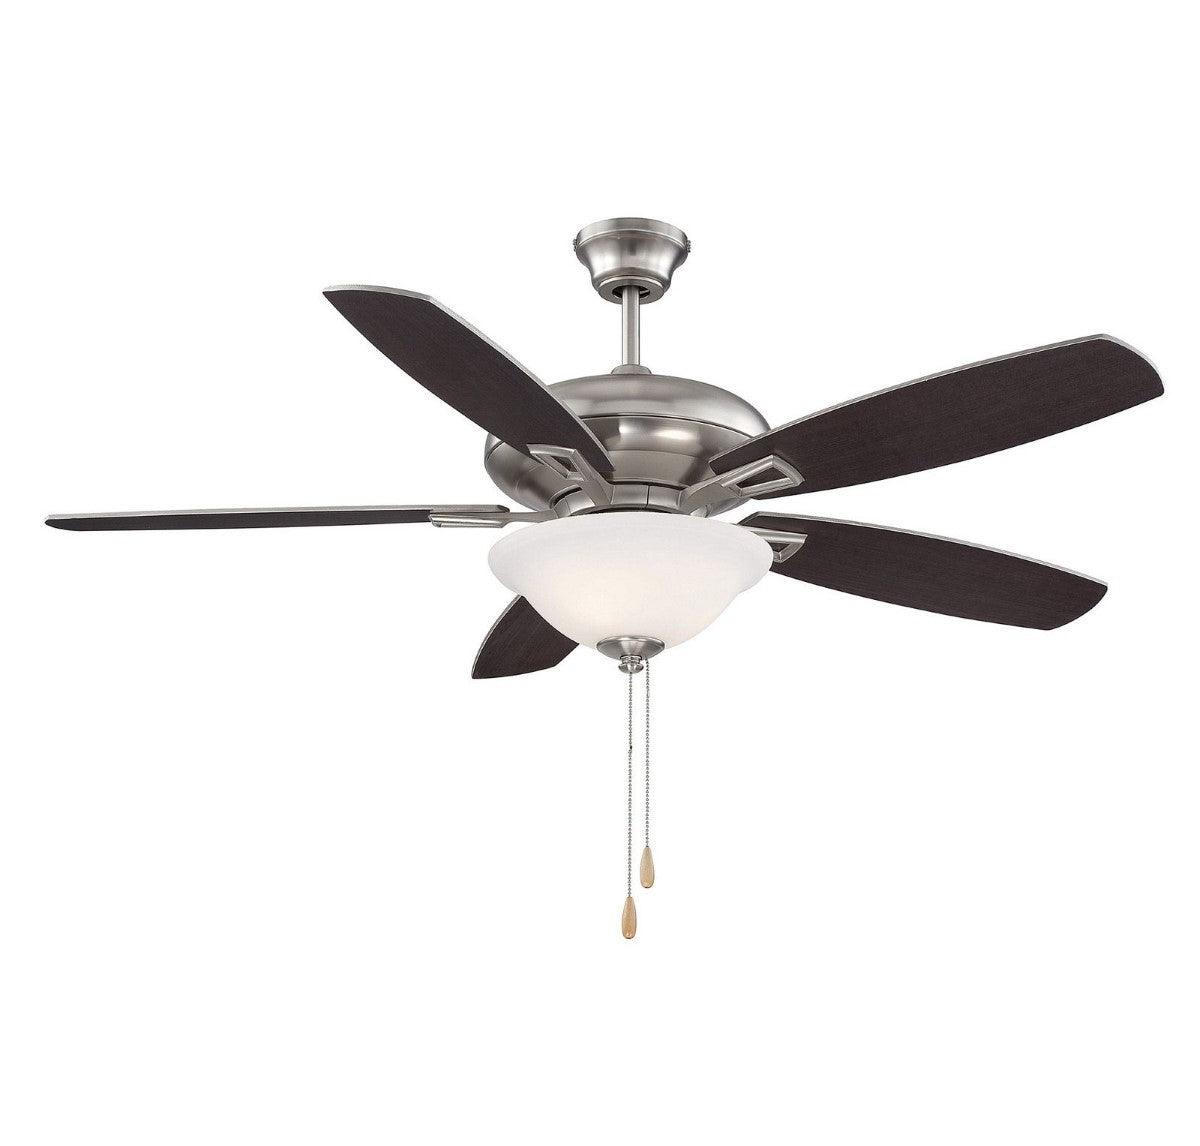 Mystique 52 Inch Satin Nickel Ceiling Fan With Light, 5 Chestnut/Silver Reversible Blades